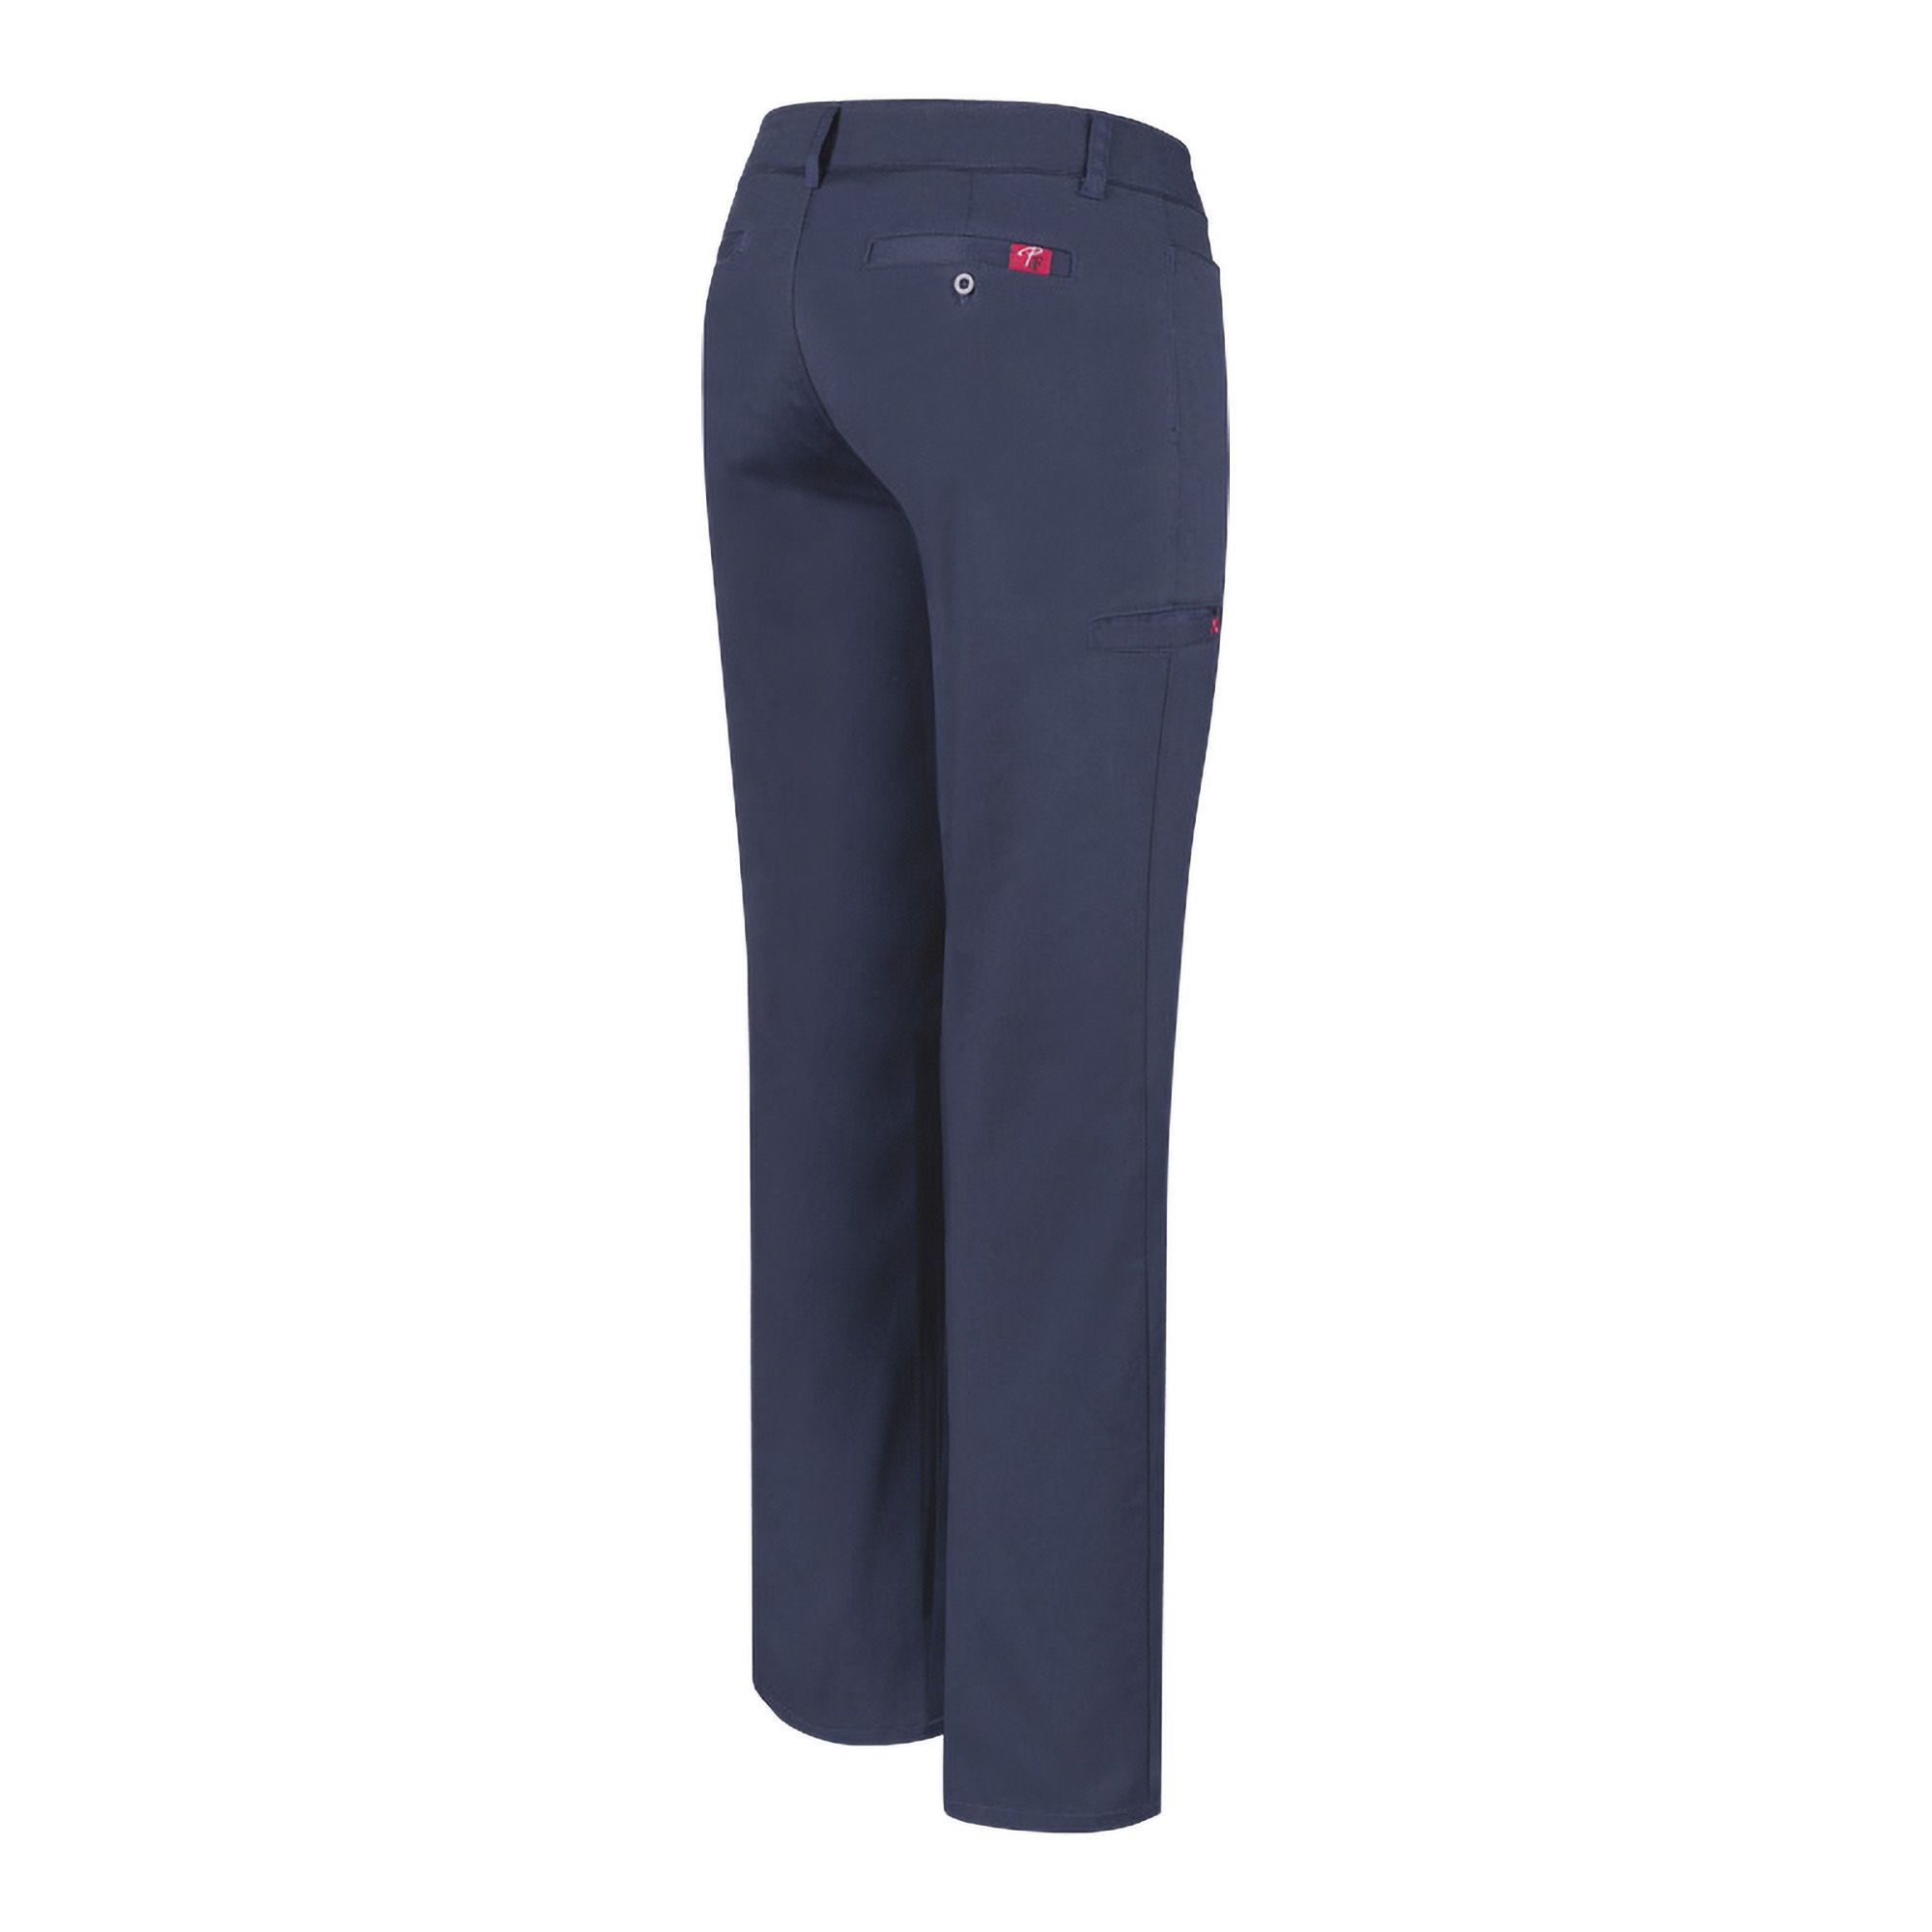 Work Pants for Women - Blue - Size 14 from PILOTE ET FILLES